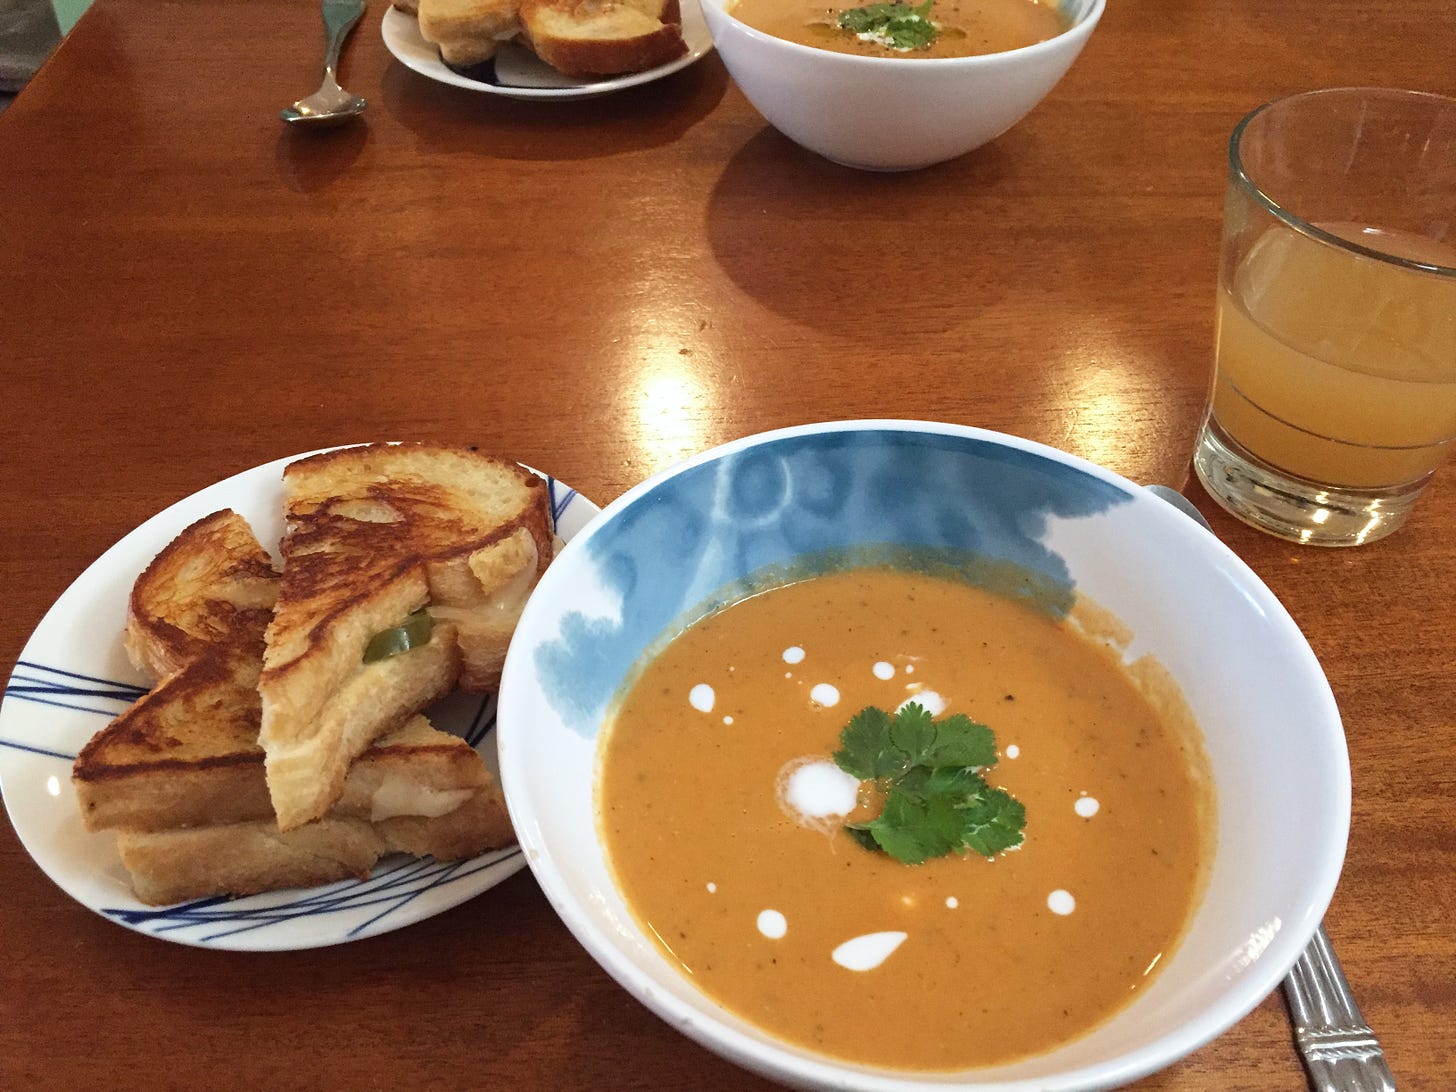 A bowl of orange tomato soup with dots of coconut milk and a few cilantro leaves. To its left, a small plate with two halves of a grilled cheese sandwich, jalapeño slices poking out.